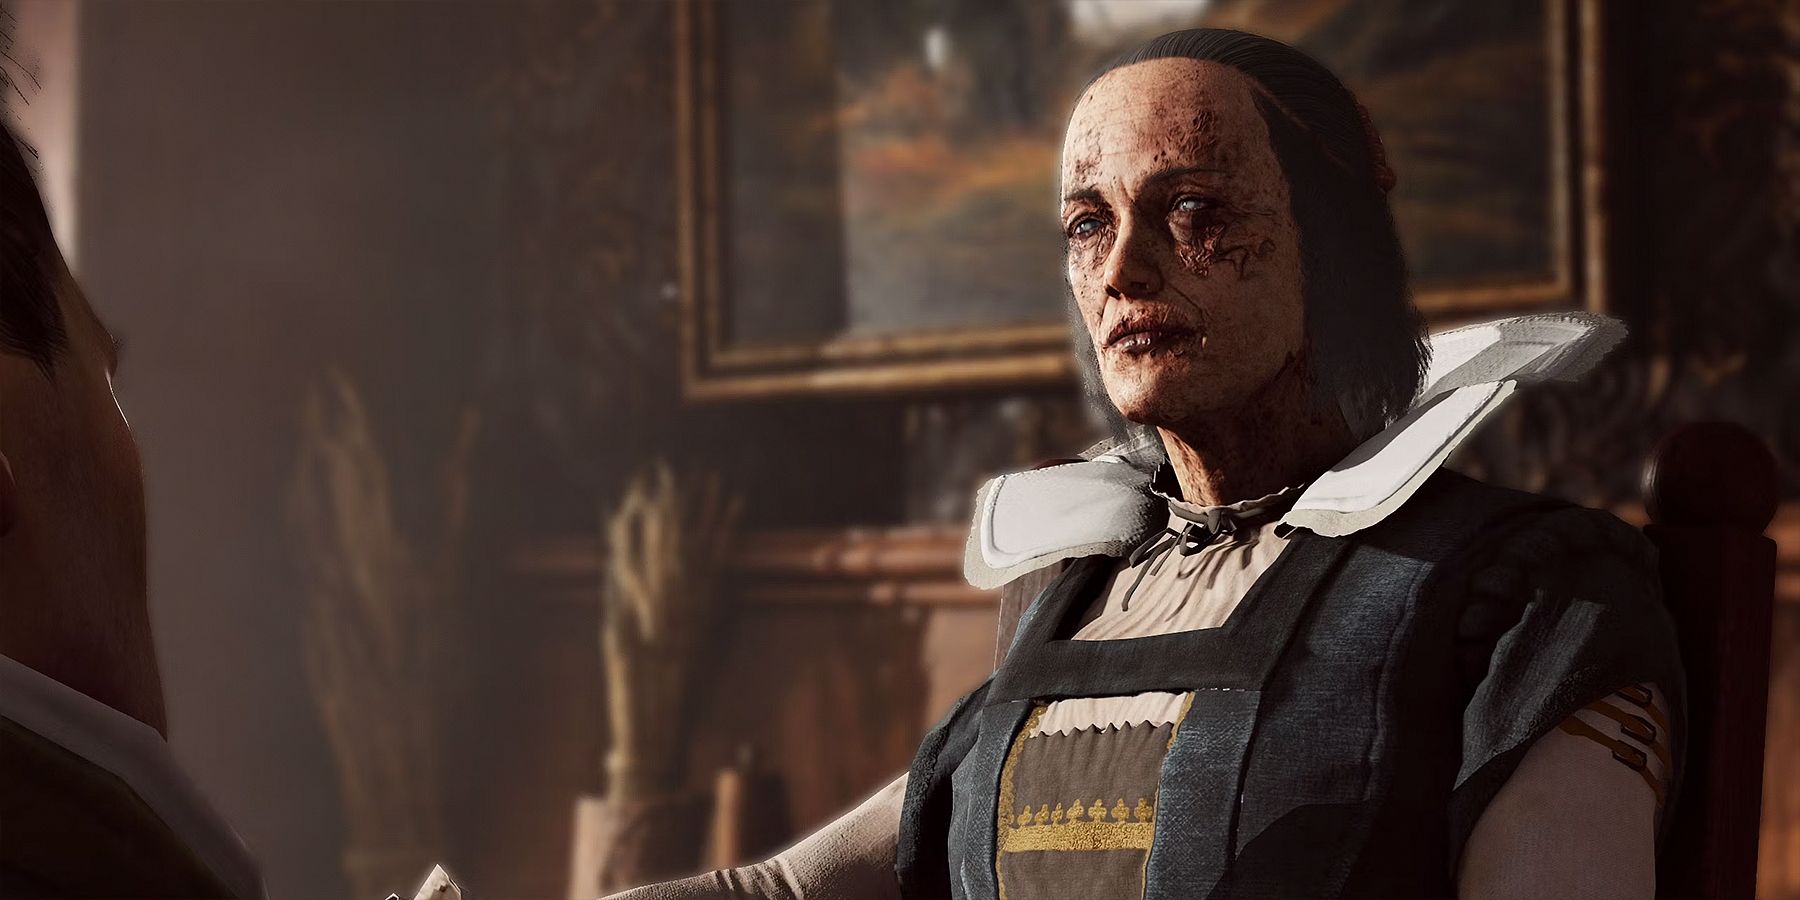 Character with the Malichor plague in GreedFall